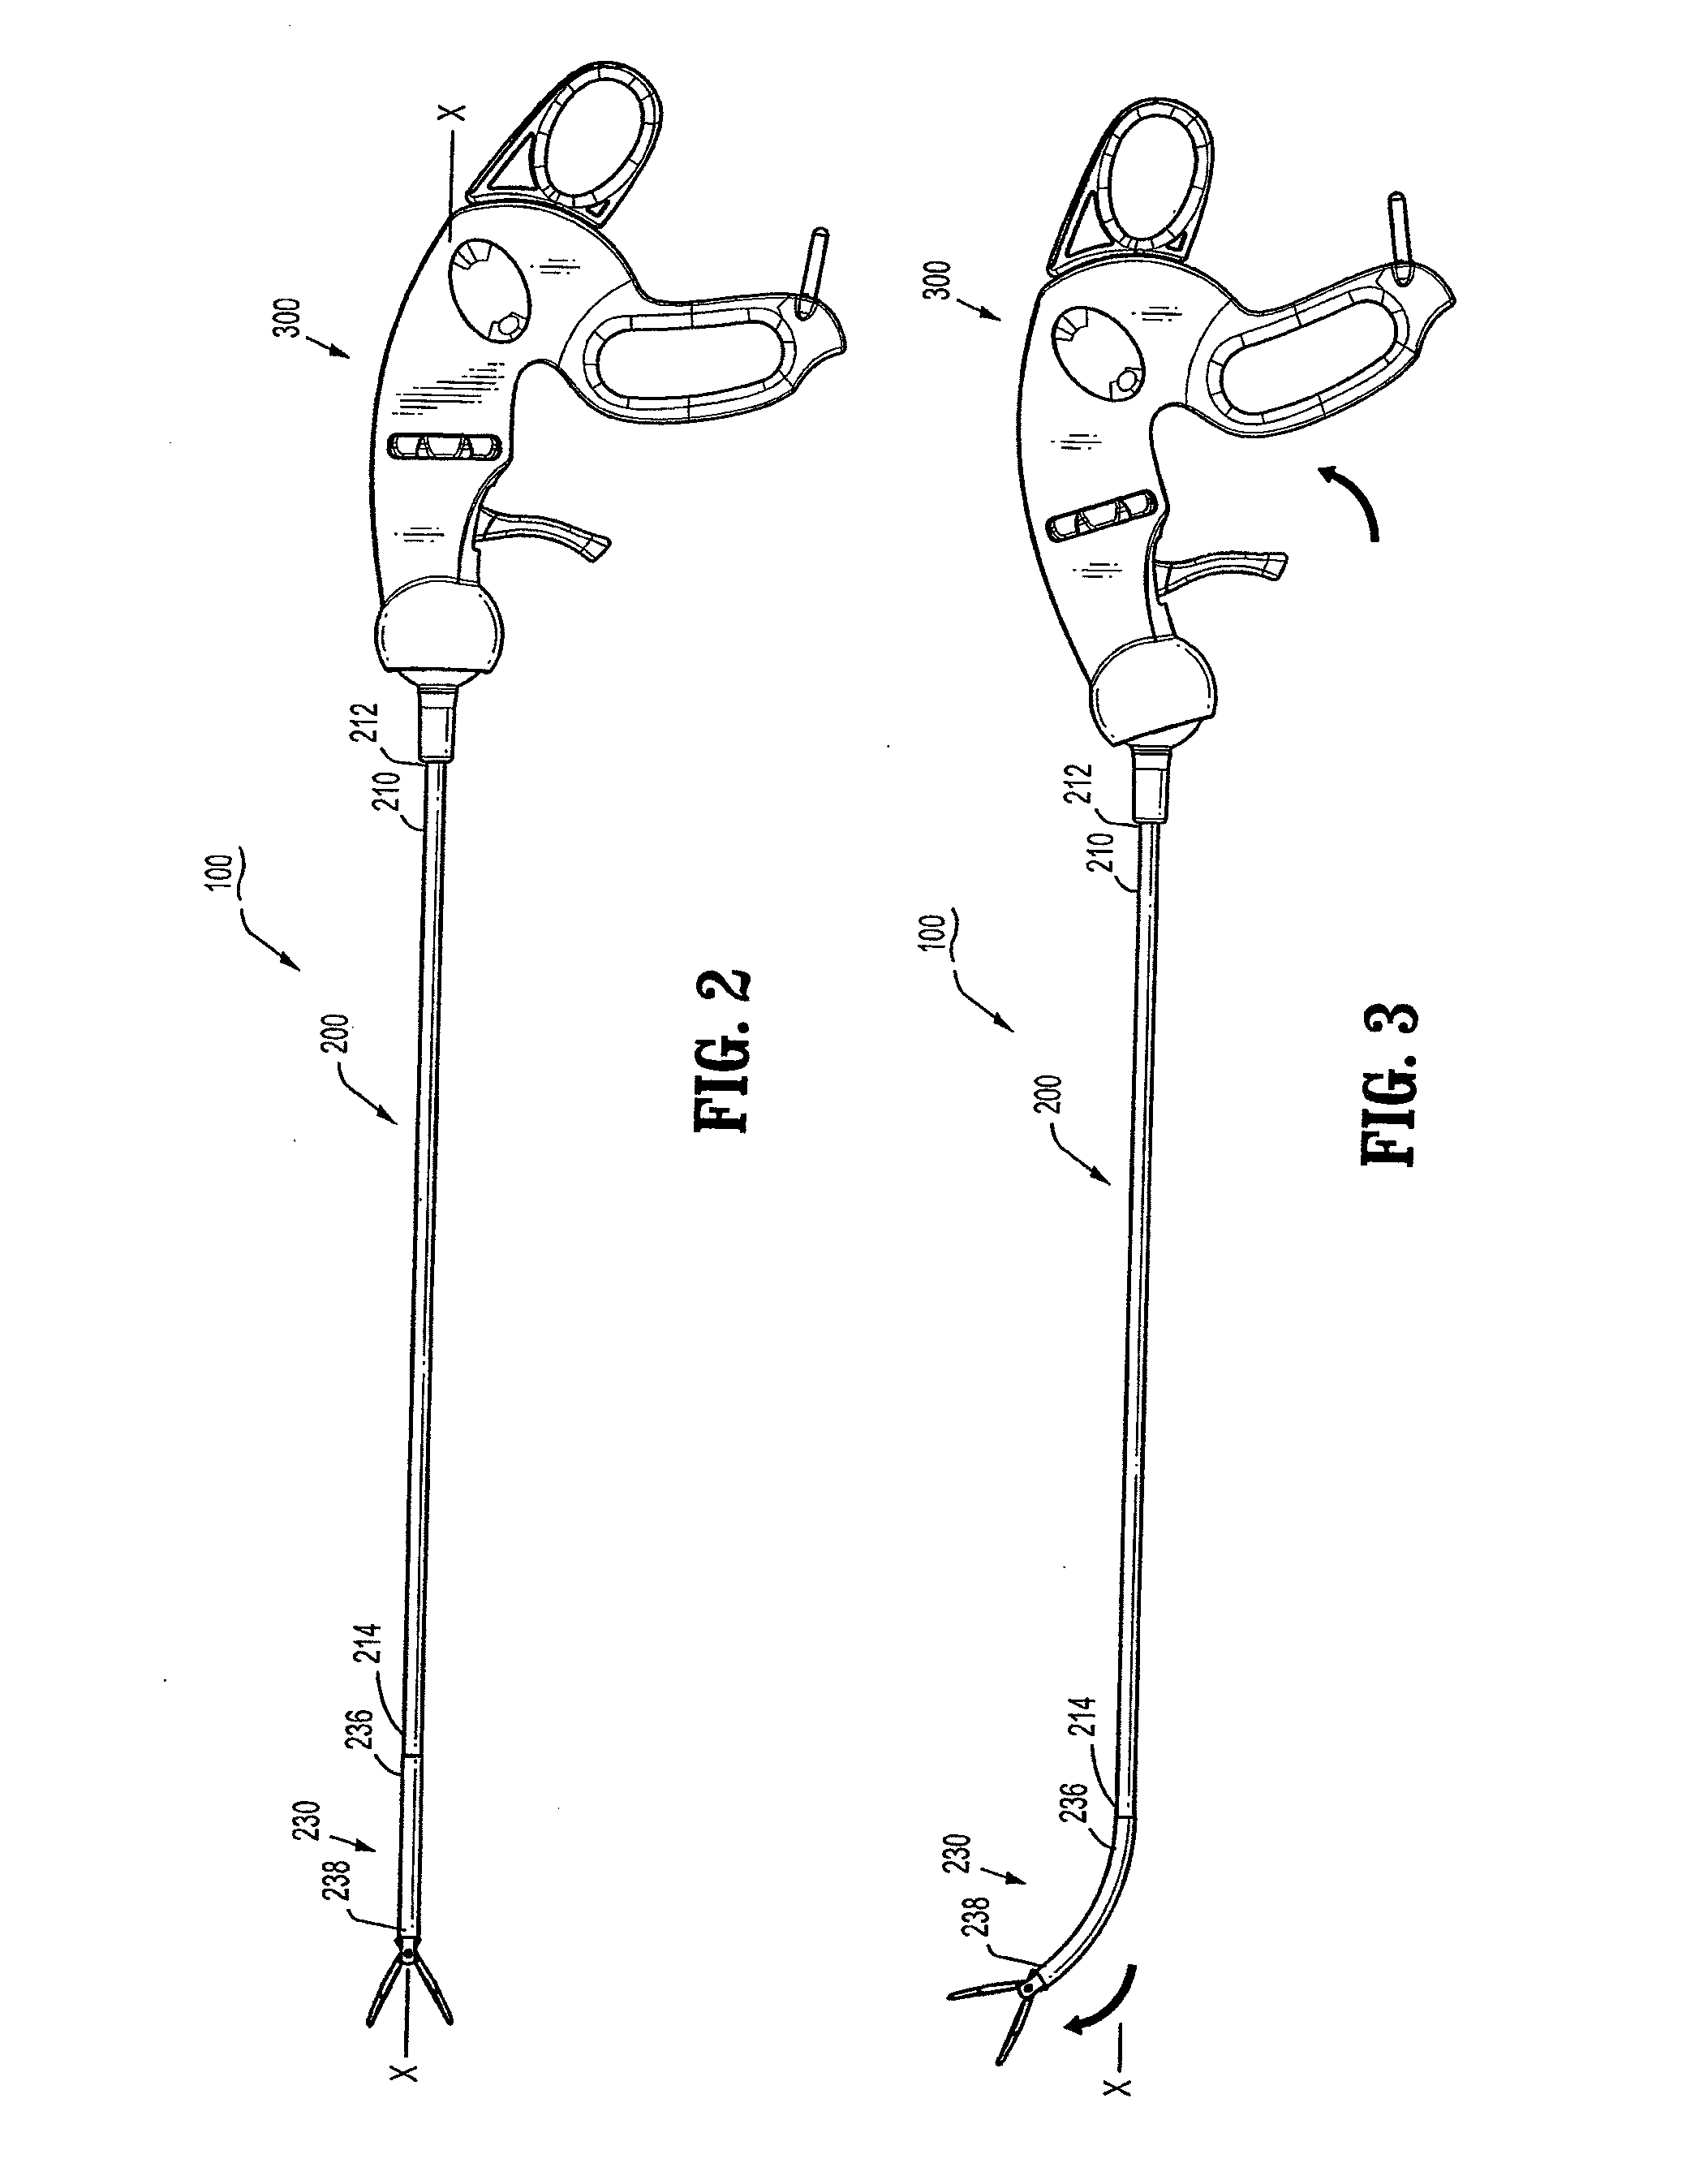 Articulating Surgical Device